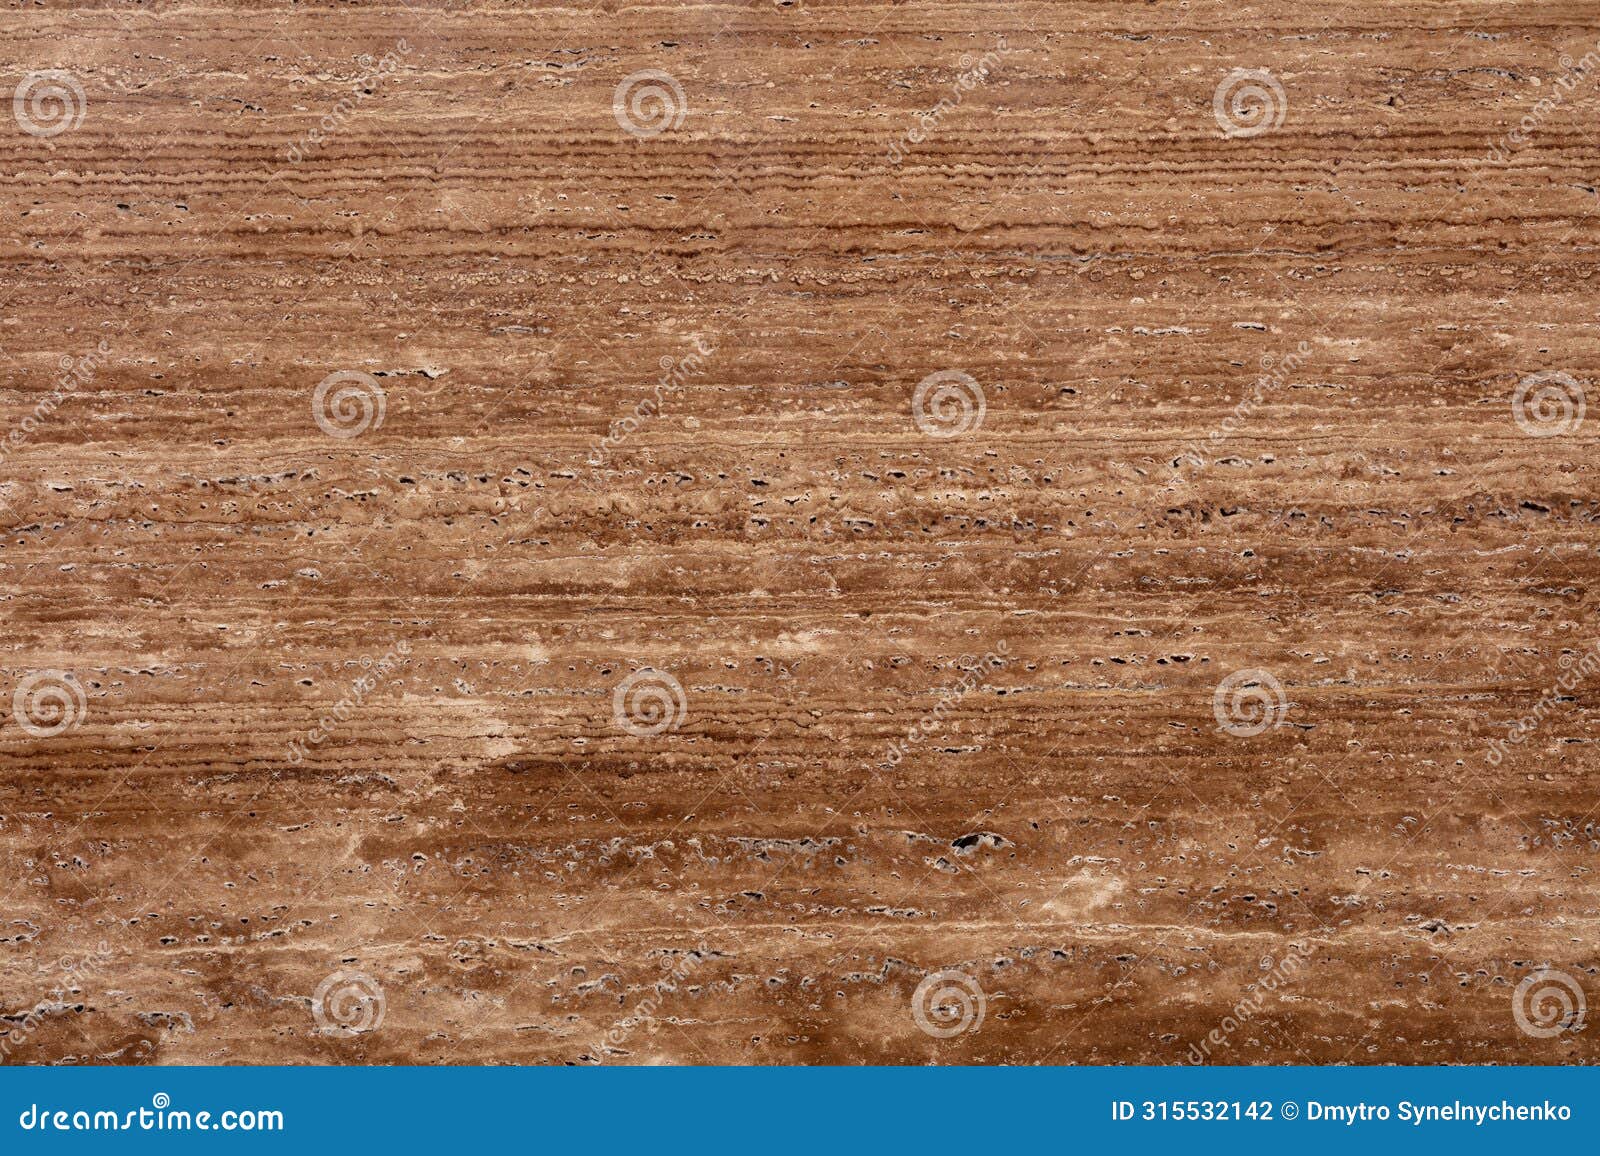 travertine noche background, texture in brown color for  work.